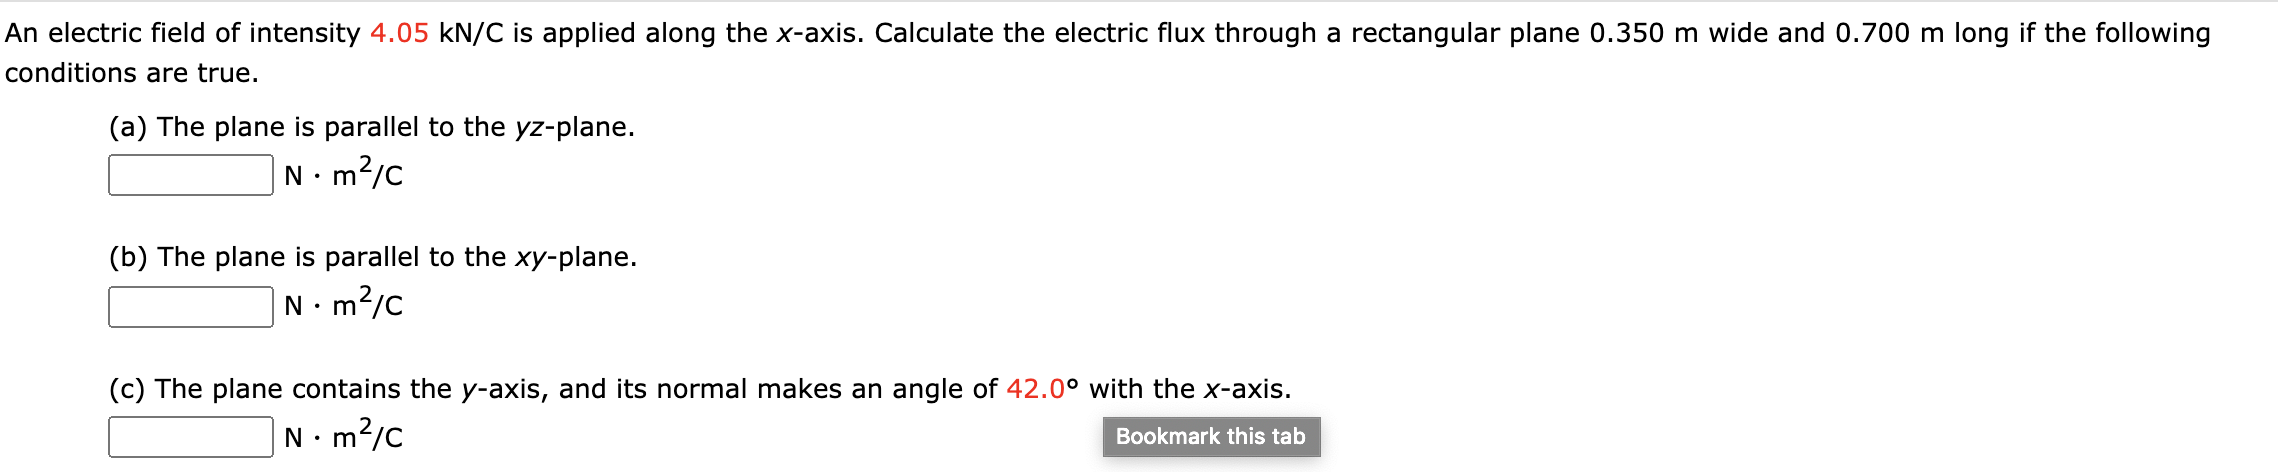 An electric field of intensity 4.05 kN/C is applied along the x-axis. Calculate the electric flux through a rectangular plane 0.350 m wide and 0.700 m long if the following
conditions are true.
(a) The plane is parallel to the yz-plane.
N. m?/c
• m
(b) The plane is parallel to the xy-plane.
N. m?/c
(c) The plane contains the y-axis, and its normal makes an angle of 42.0° with the x-axis.
N•m?/c
Bookmark this tab
